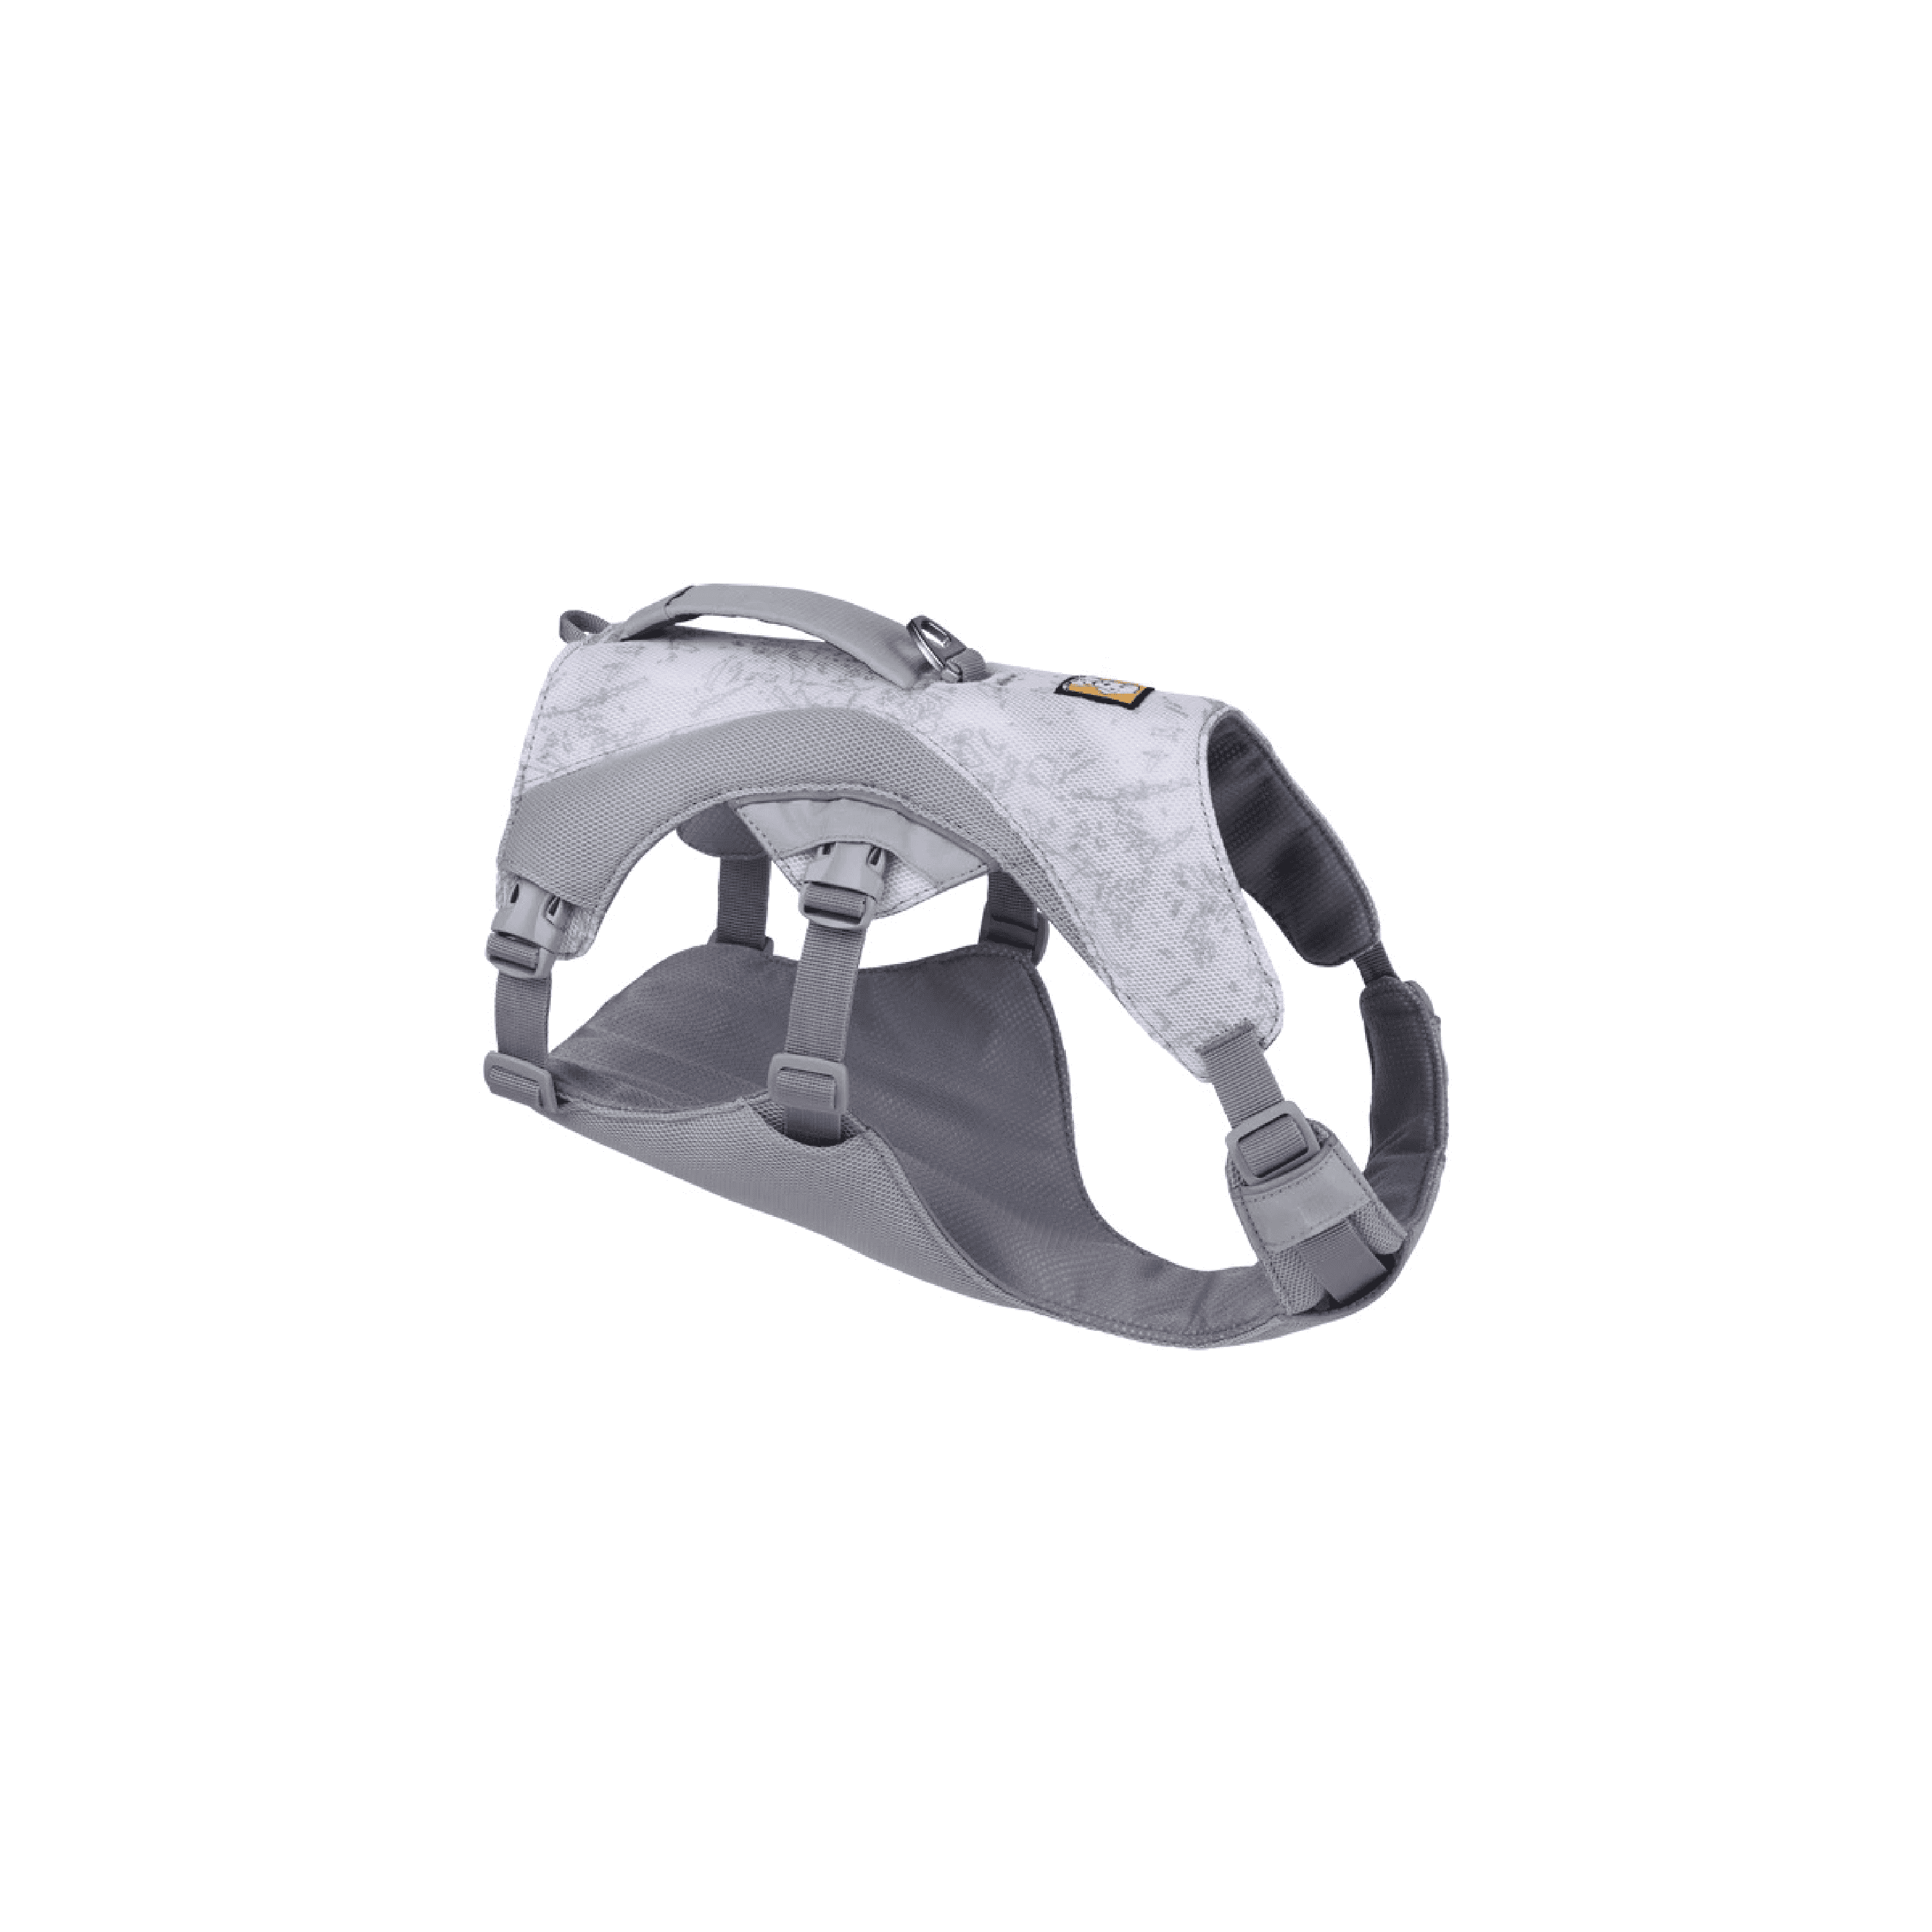 Ruffwear Swamp Cooler Dog Cooling Harness Graphite Gray » Dogfather and Co. | Dog Grooming and